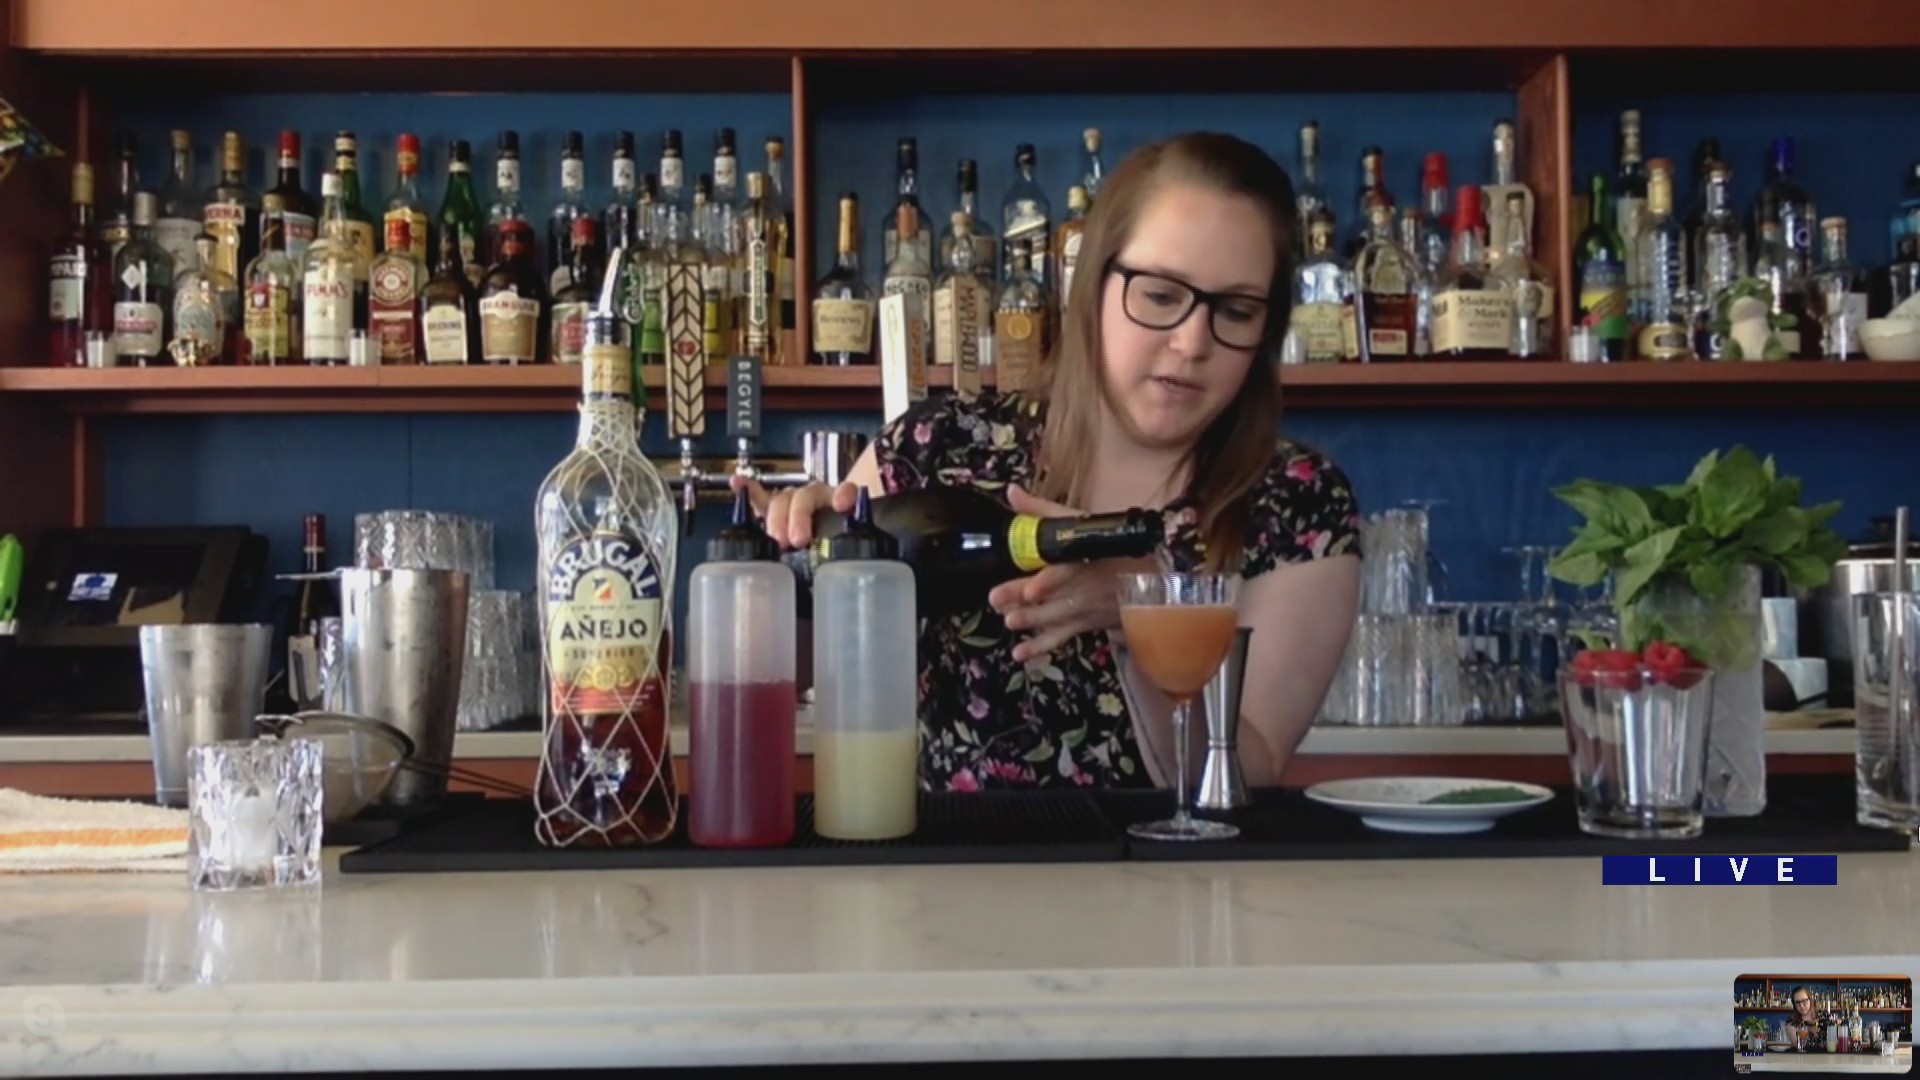 Around ‘The House’ checks in with a Mixologist for some cocktail tutorials